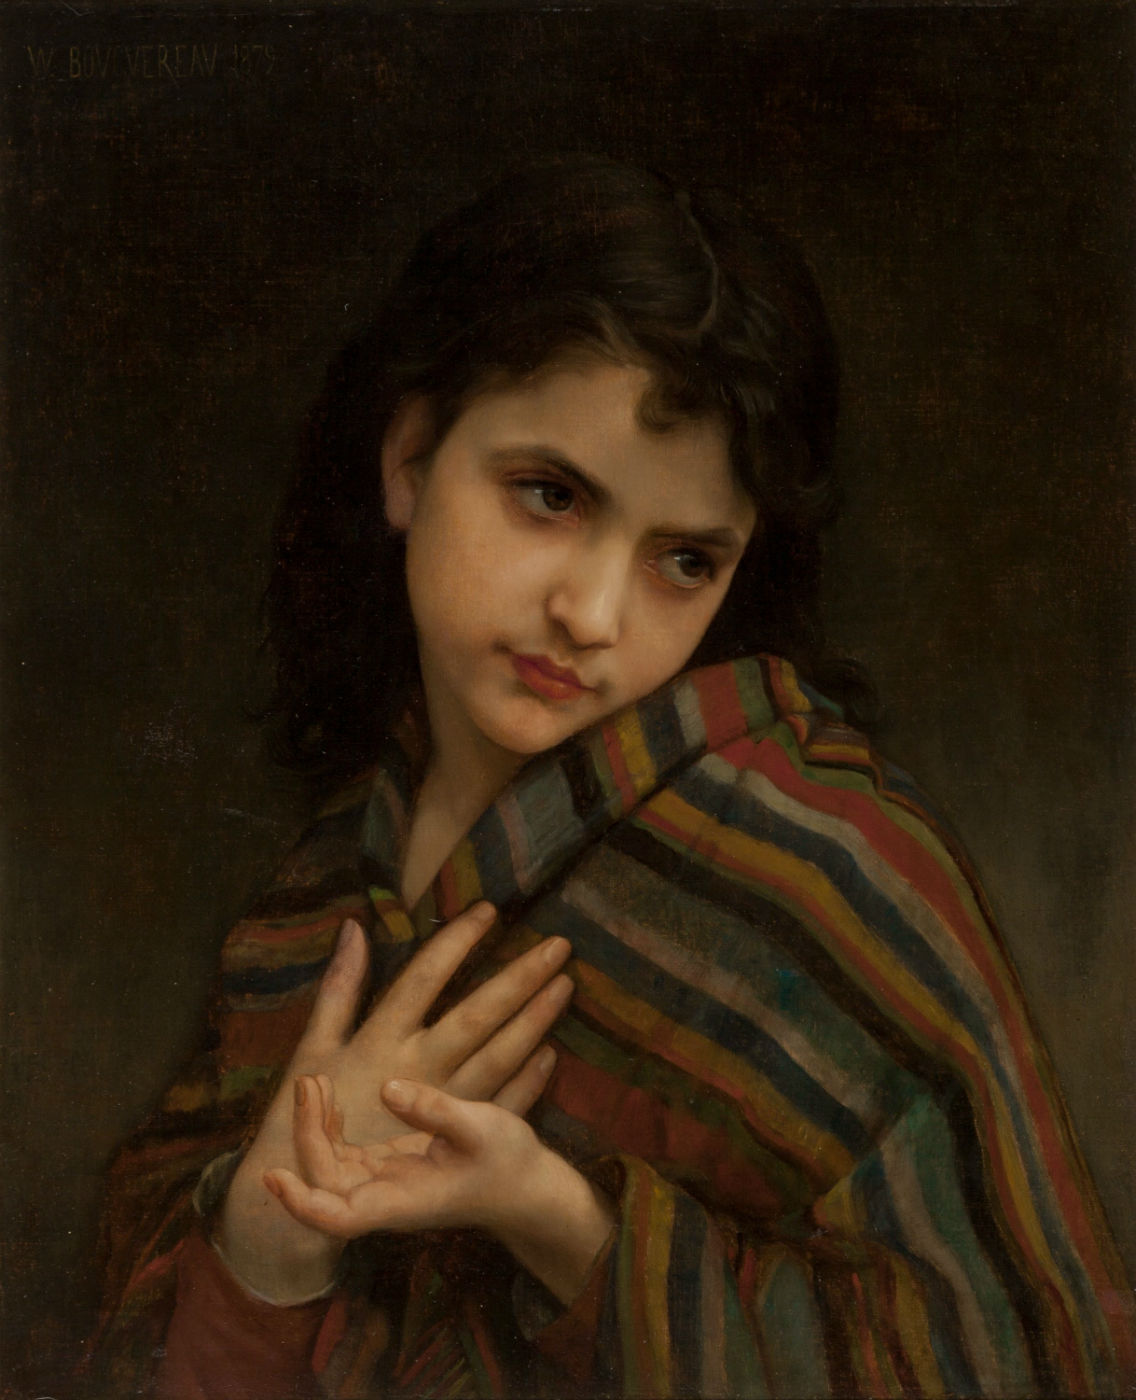 Gustave Courbet, ‘La frileuse.’ Price realized: $100,000. Heritage Auctions image